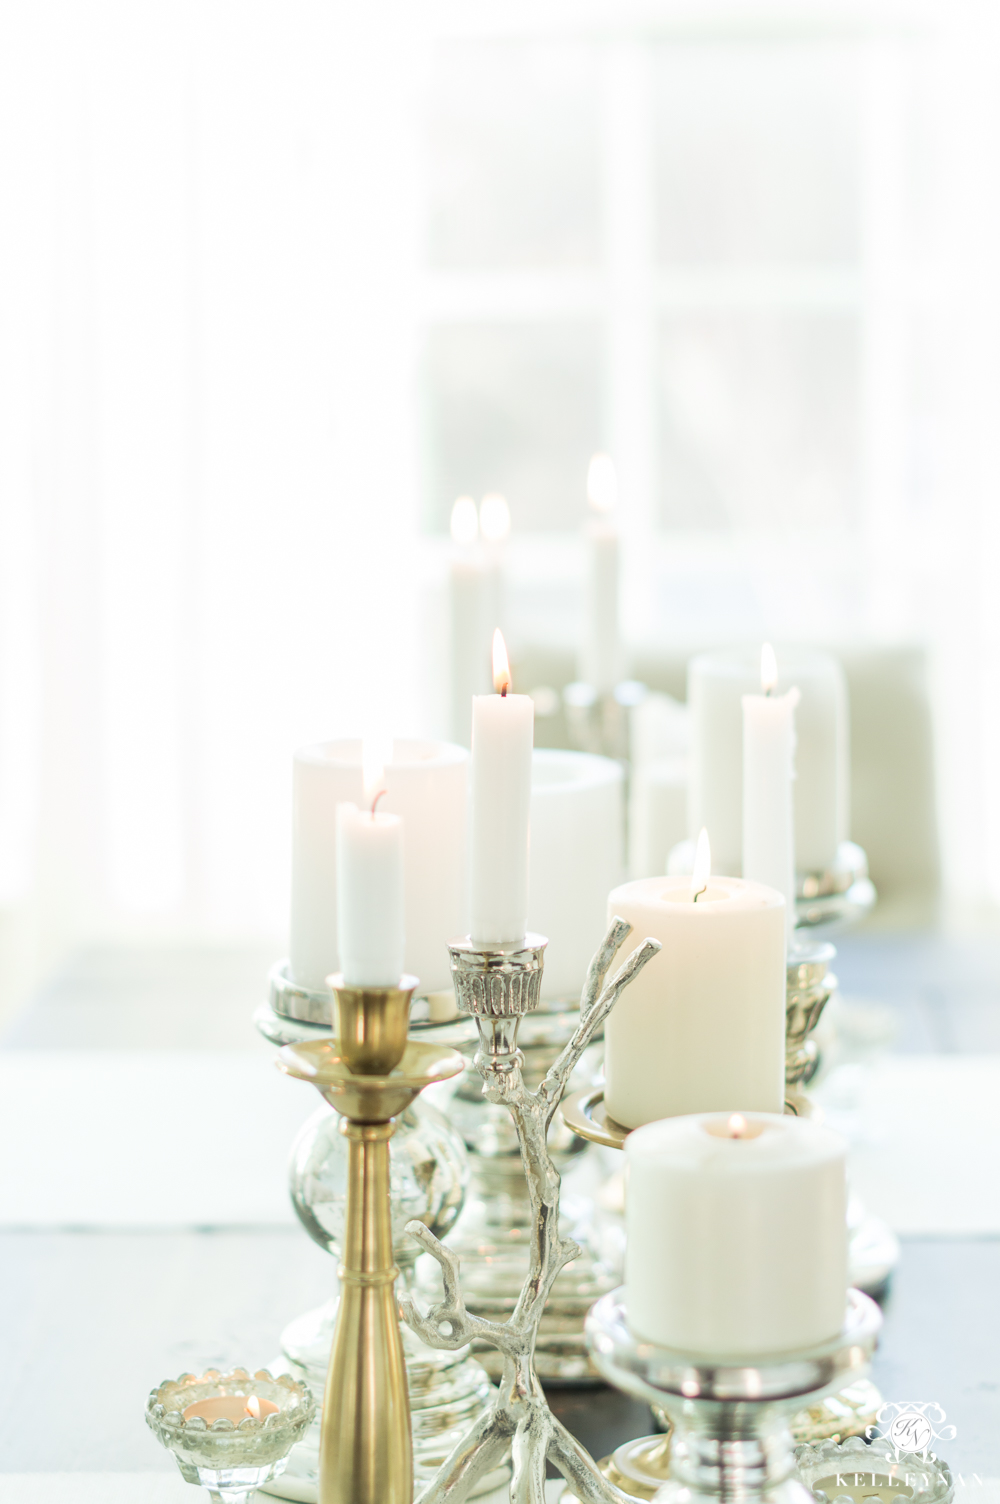 Candle centerpiece on dining room table